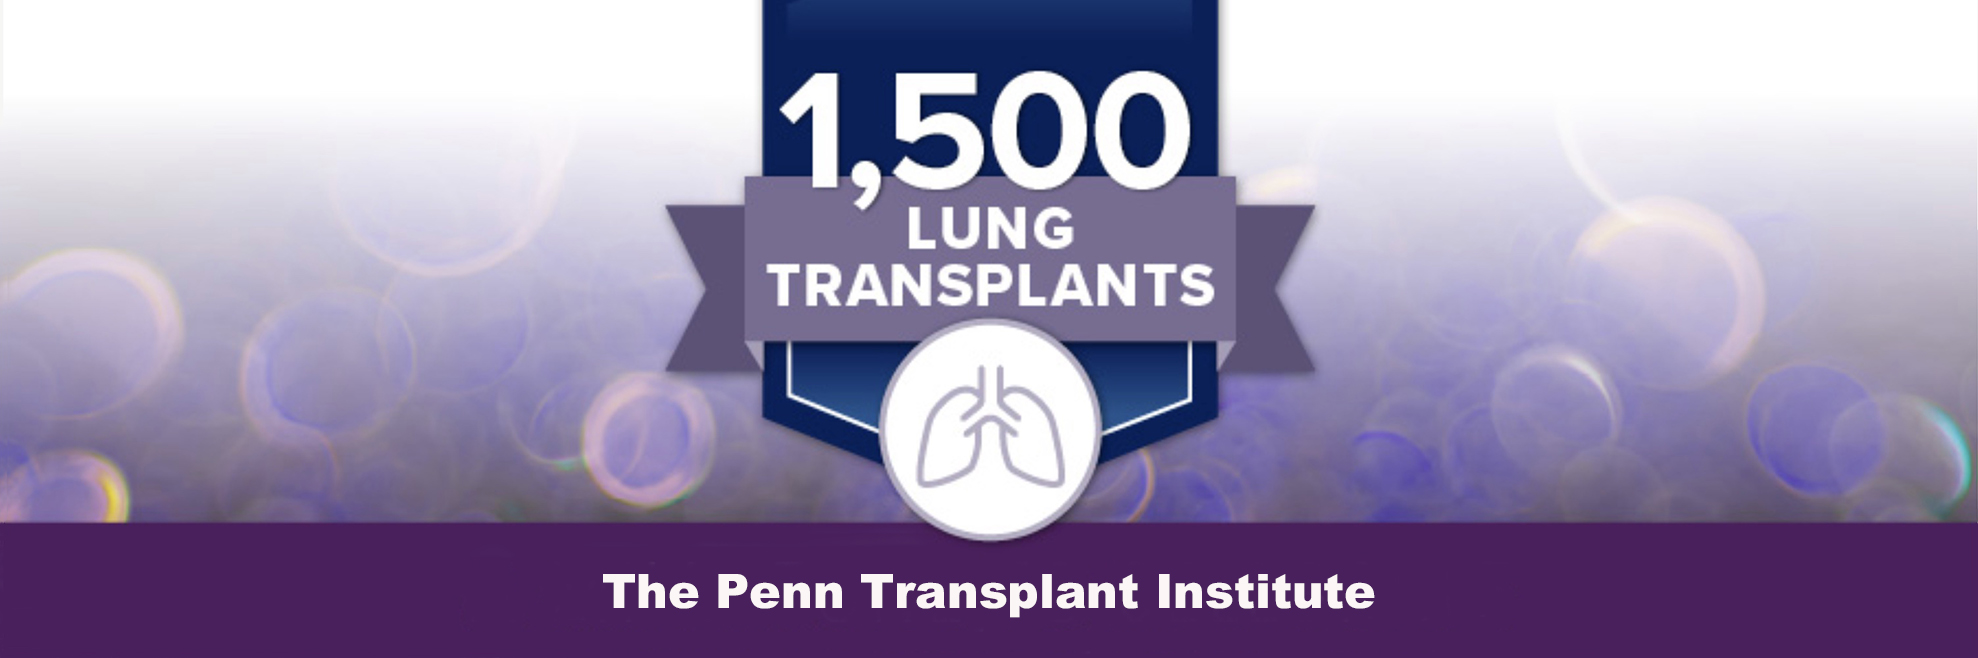 1500 lungs badge